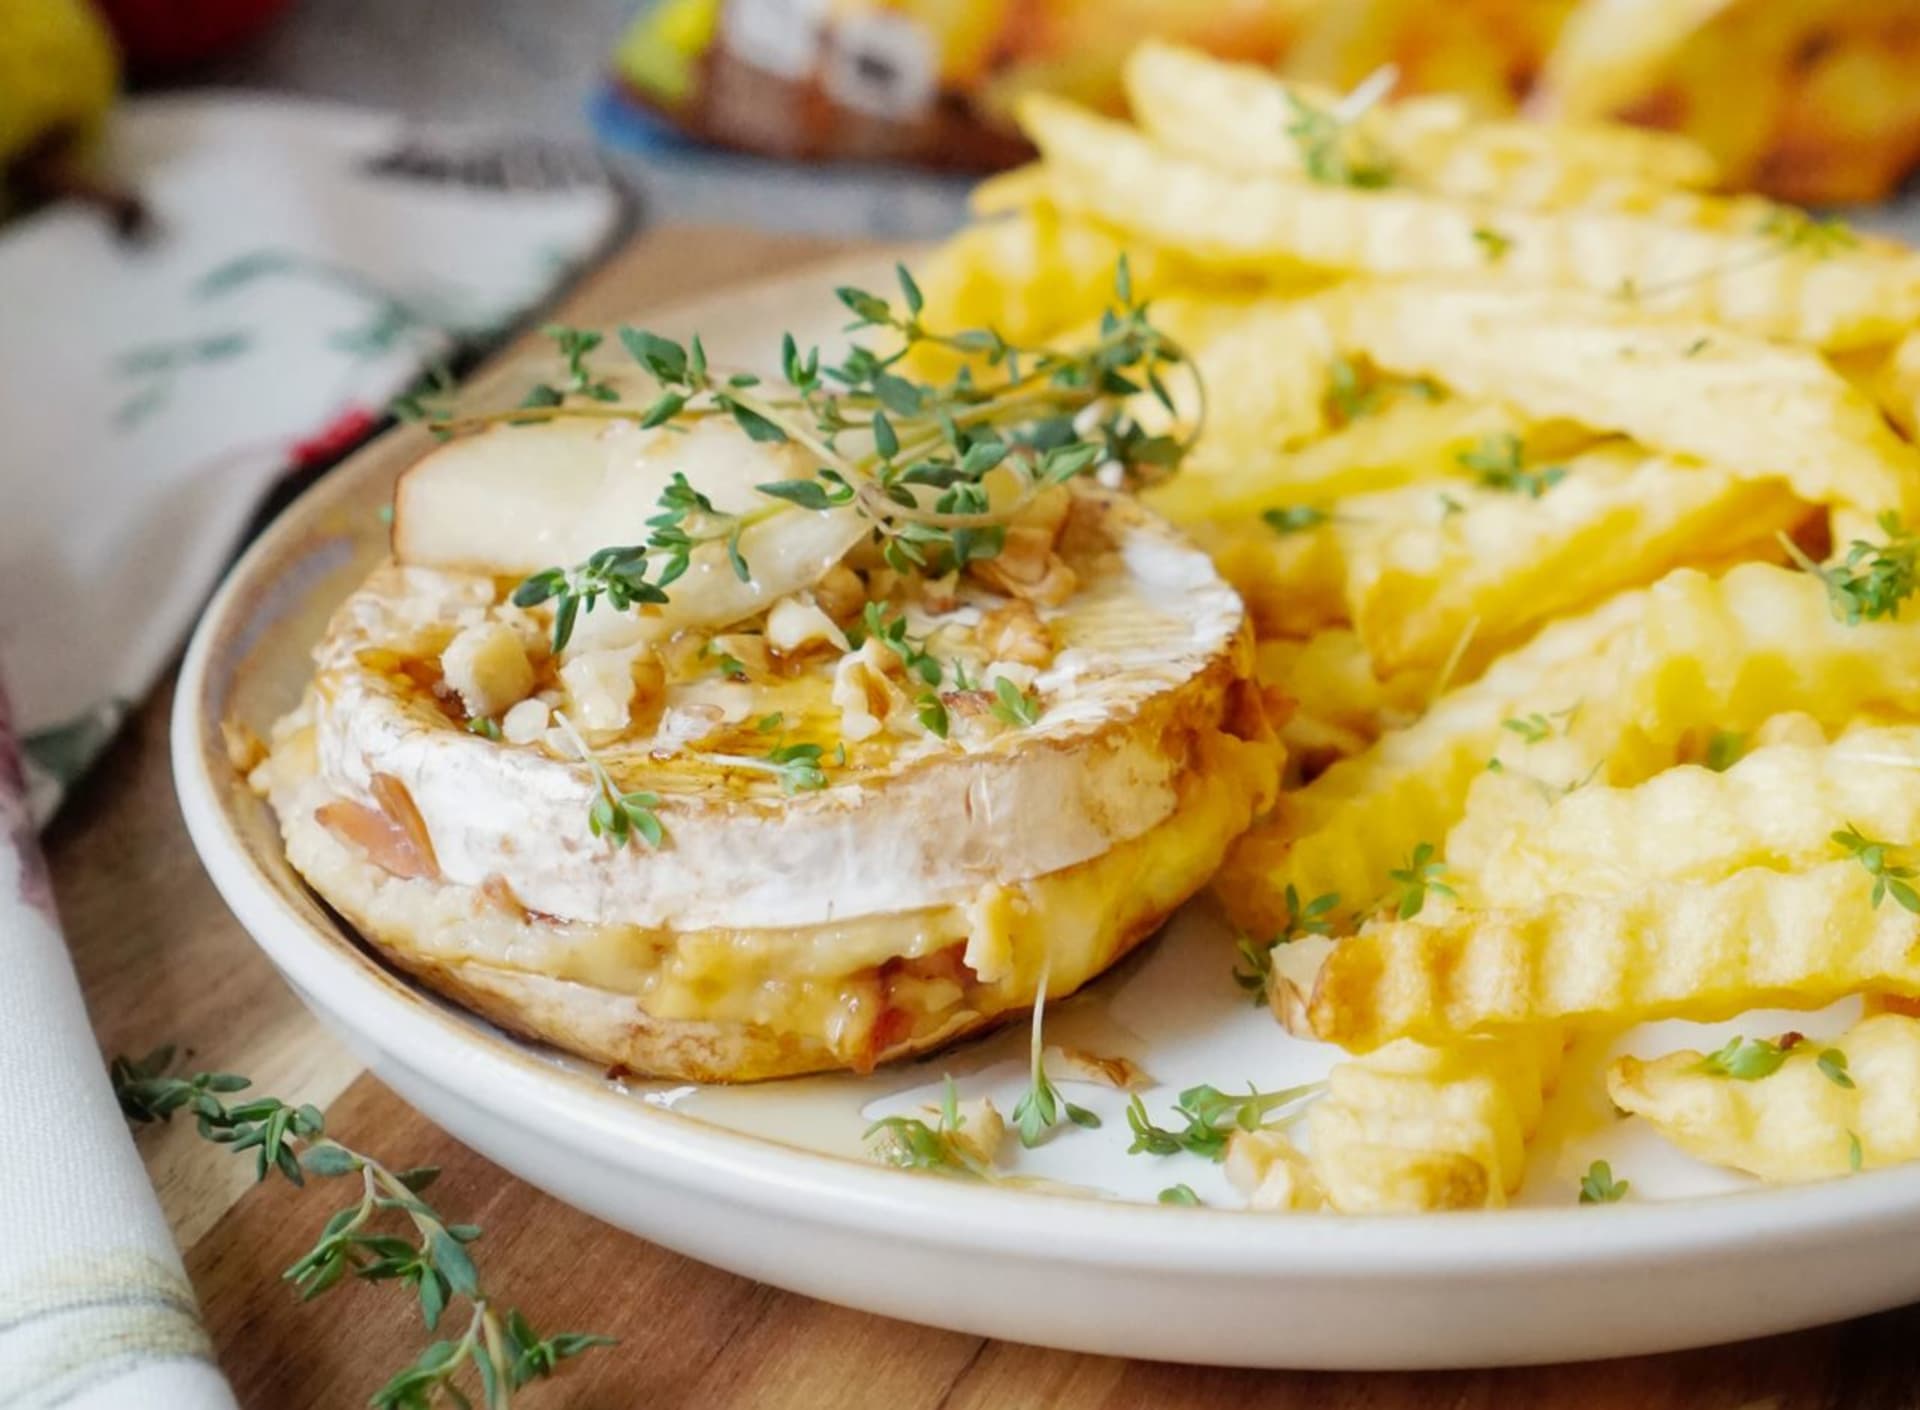 Baked armen stuffed with pear and ham with french fries